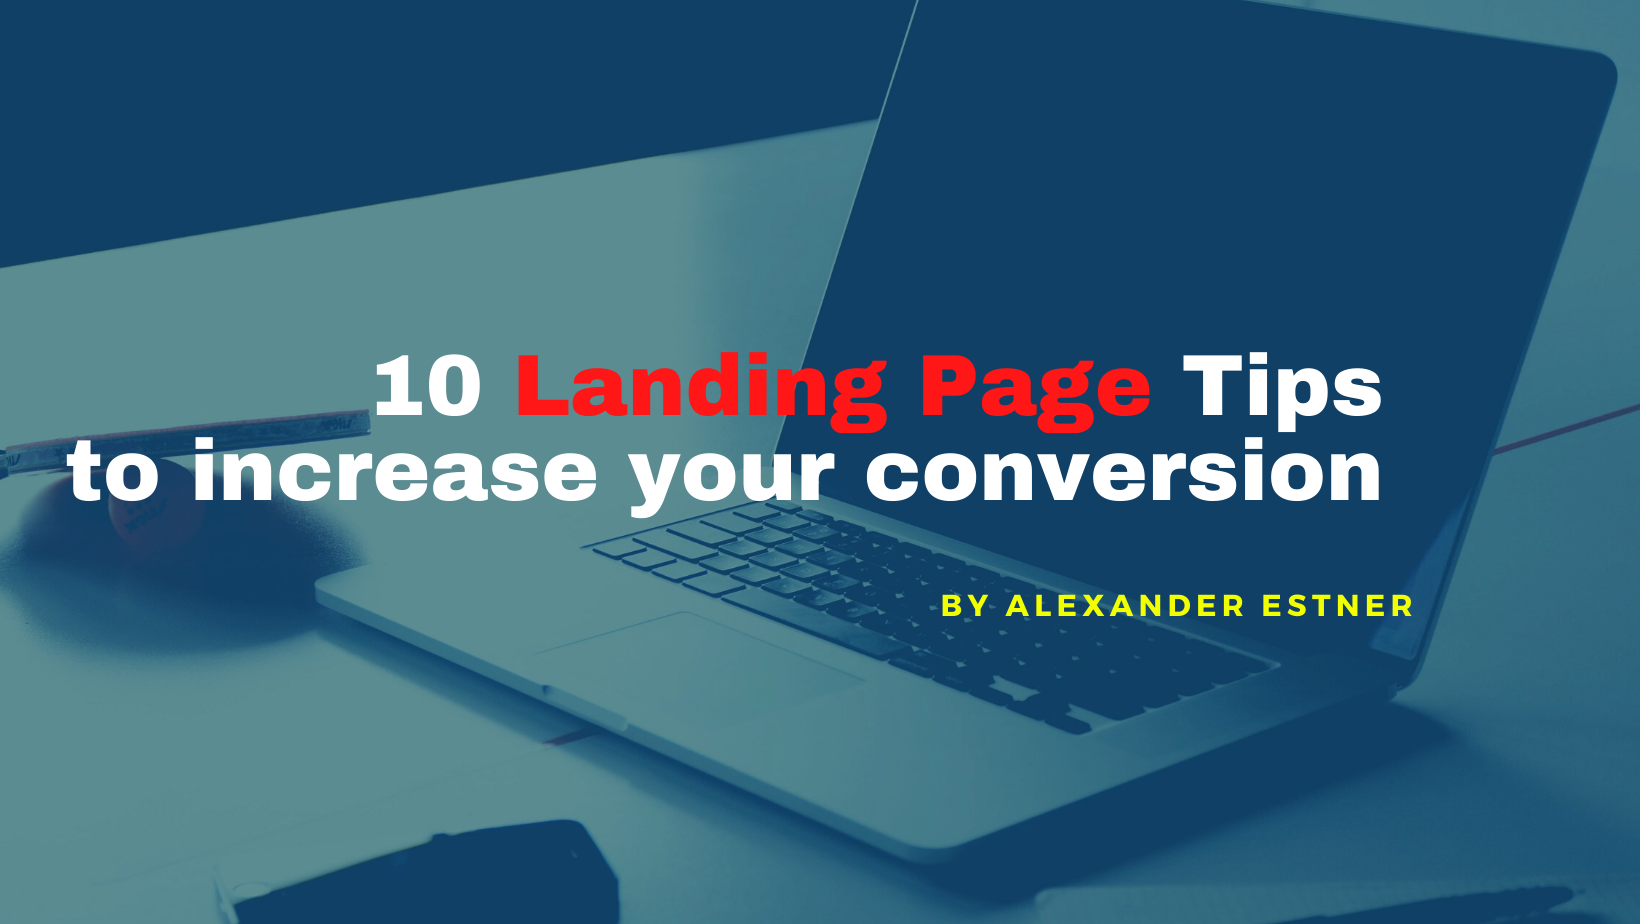 10 Landing page tips to increase your conversion (SaaS)